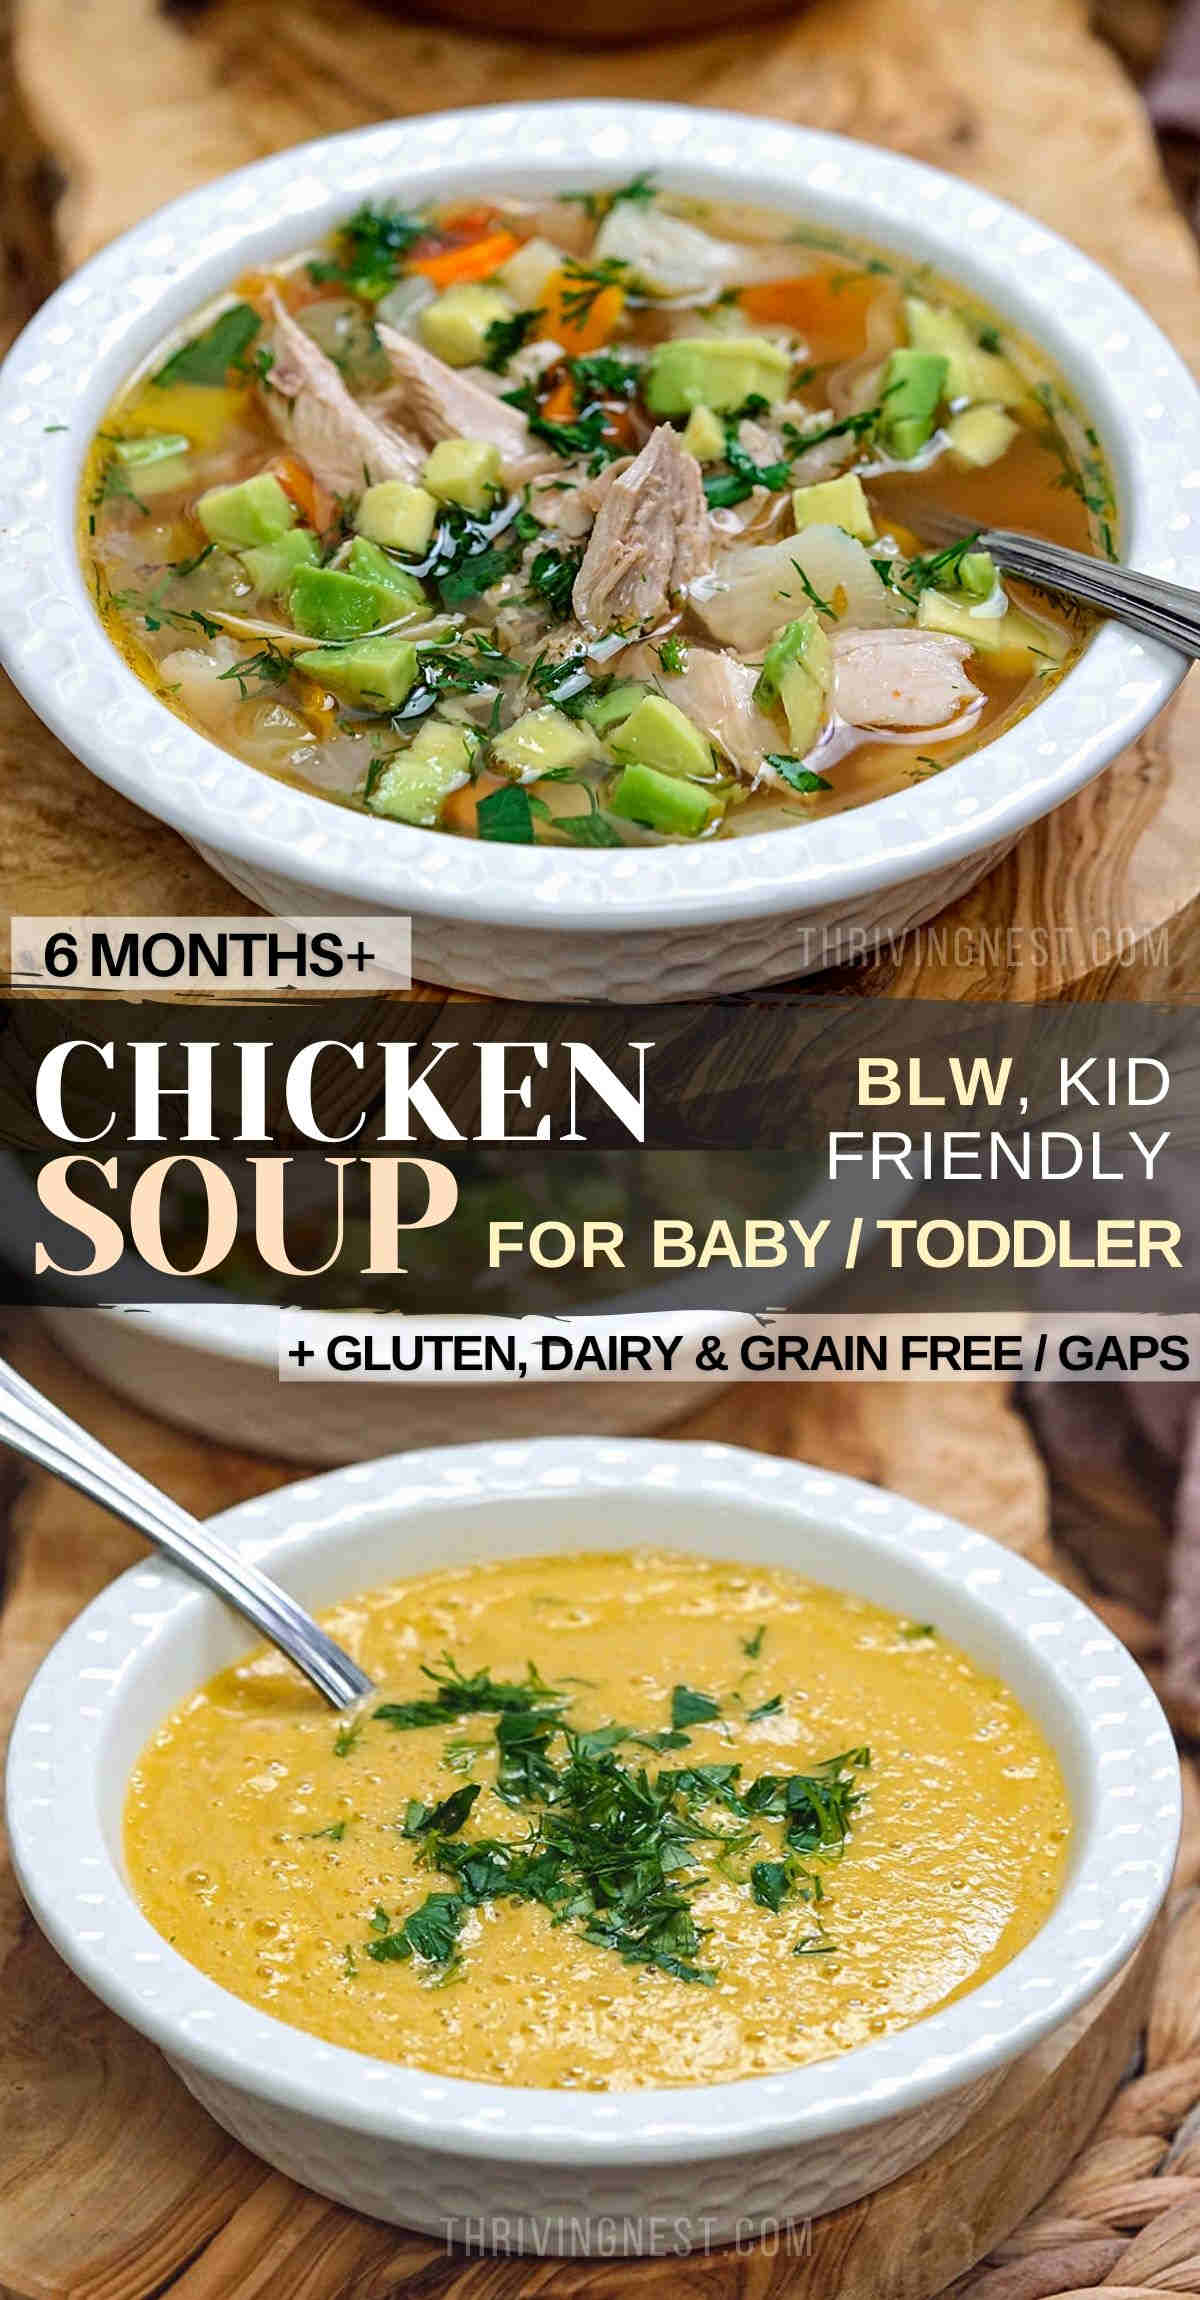 Chicken soup for babies, toddlers and older kids that can be served for babies from 6 months in a smooth puree form or chunkier for older family members. This baby chicken soup is naturally gluten, grain and dairy free, and even GAPS friendly, perfect for babies with food allergies. This baby chicken soup is a 2 in 1 recipe: homemade chicken stock into which fresh vegetables are added along with herbs and seasonings. #chickensoupforbabies #chickensouprecipe #babyfood #babysoup #soupforbabies